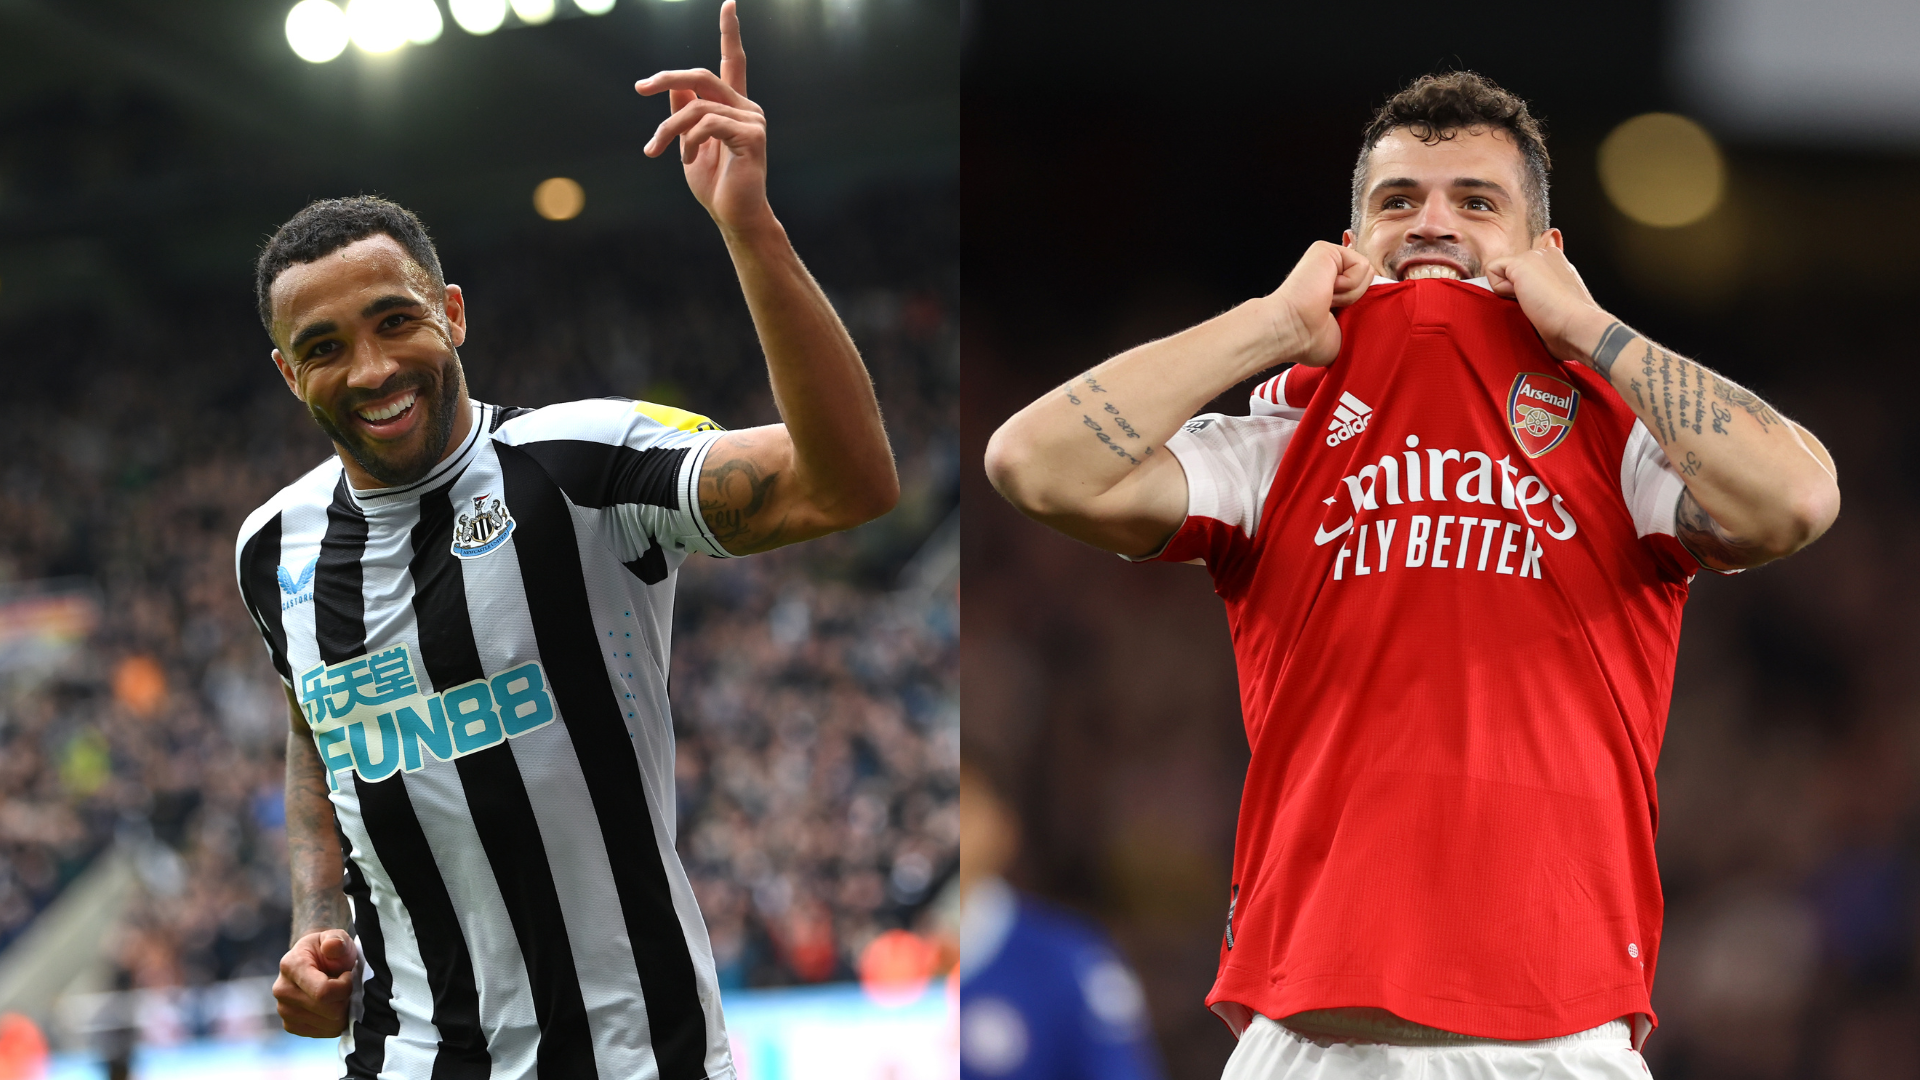 Newcastle United vs Arsenal Where to watch the match online, live stream, TV channels and kick-off time Goal US